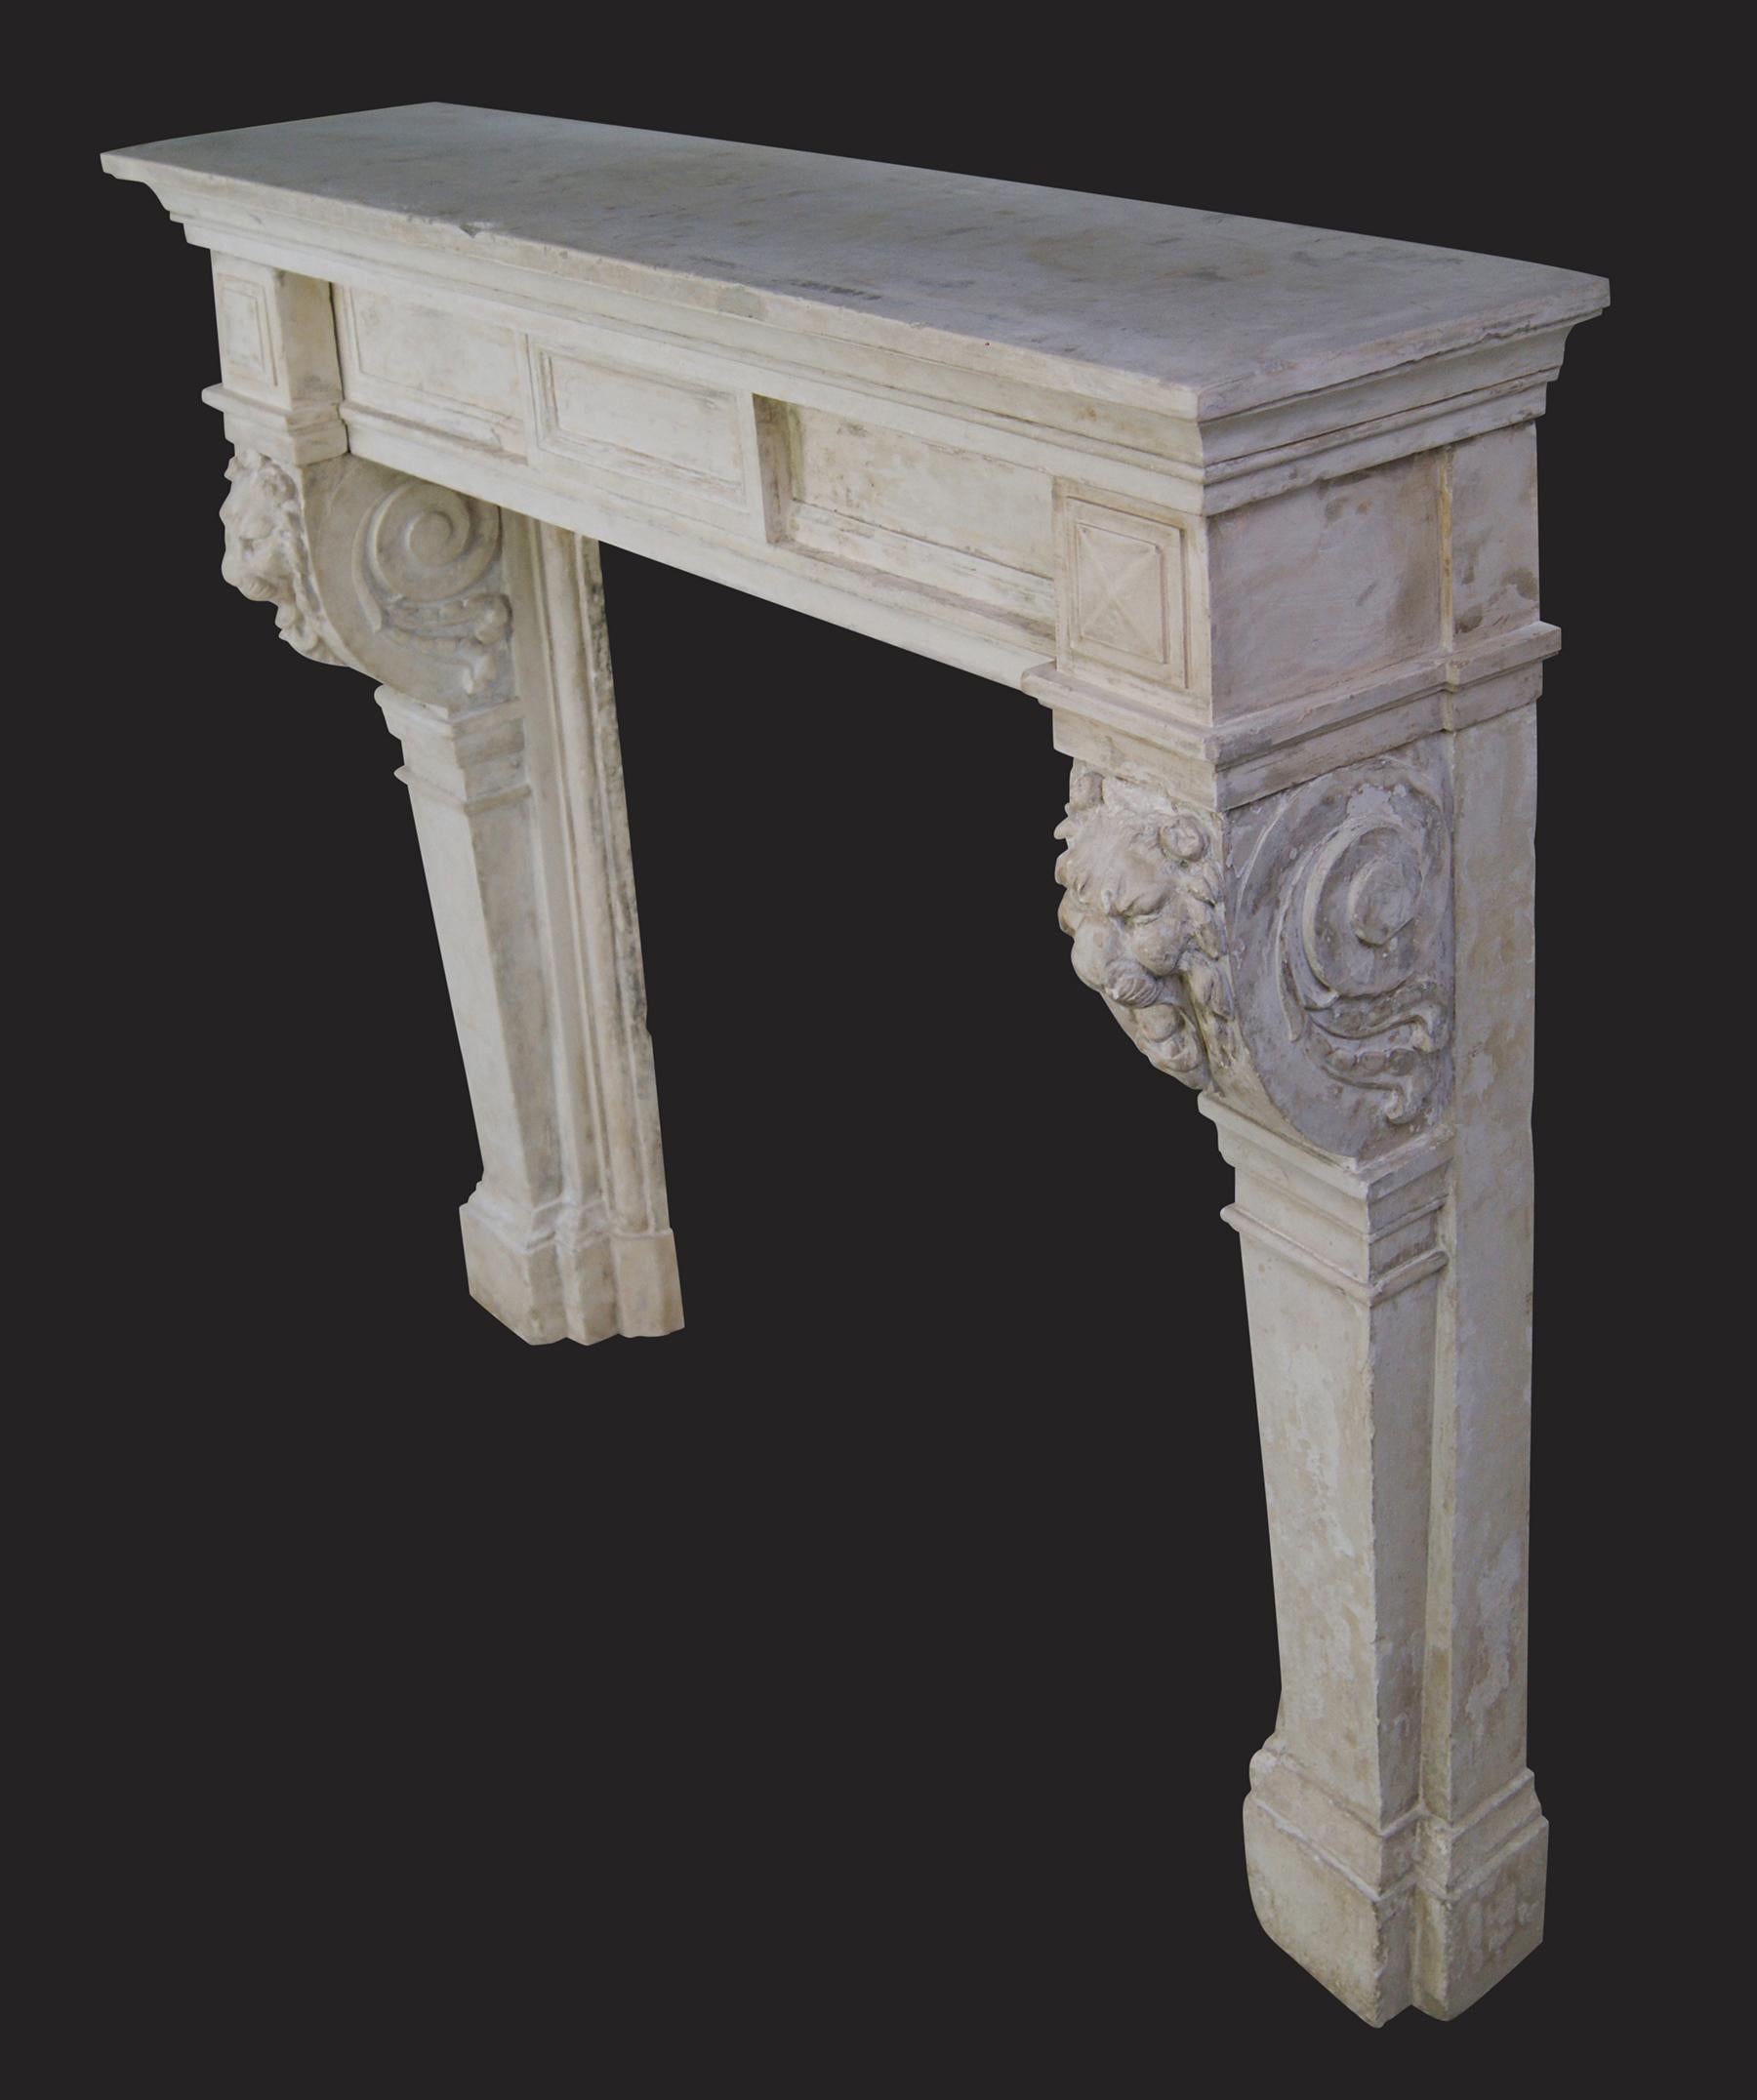 A fine Antique stone chimneypiece of architectural form, with plinthed tapered column-jambs supporting finely carved lion-fronted scrolled corbels.  The diamond corner-blocks flank the simple frieze with central tablet set below a substantial